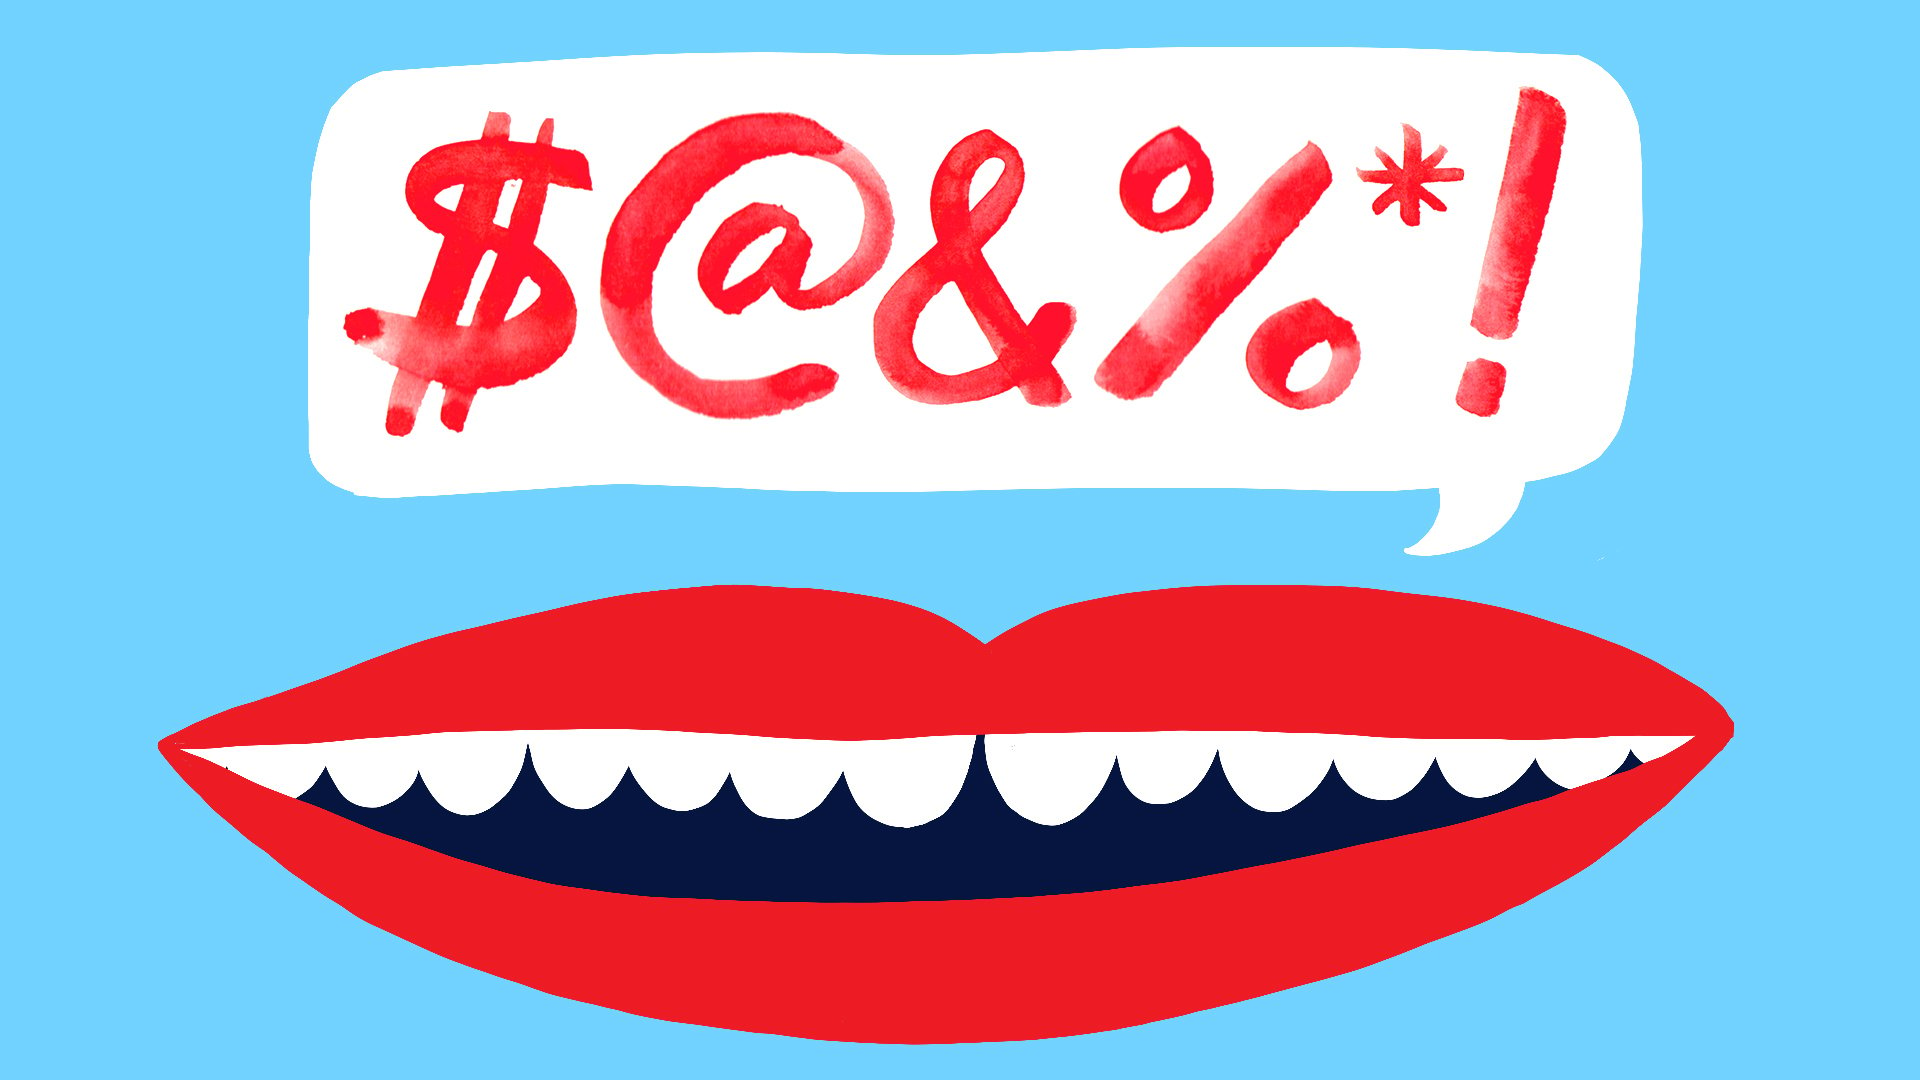 An illustration of a mouth, with a speech bubble coming from it. The speech bubble contains various symbols, signifying swearing.